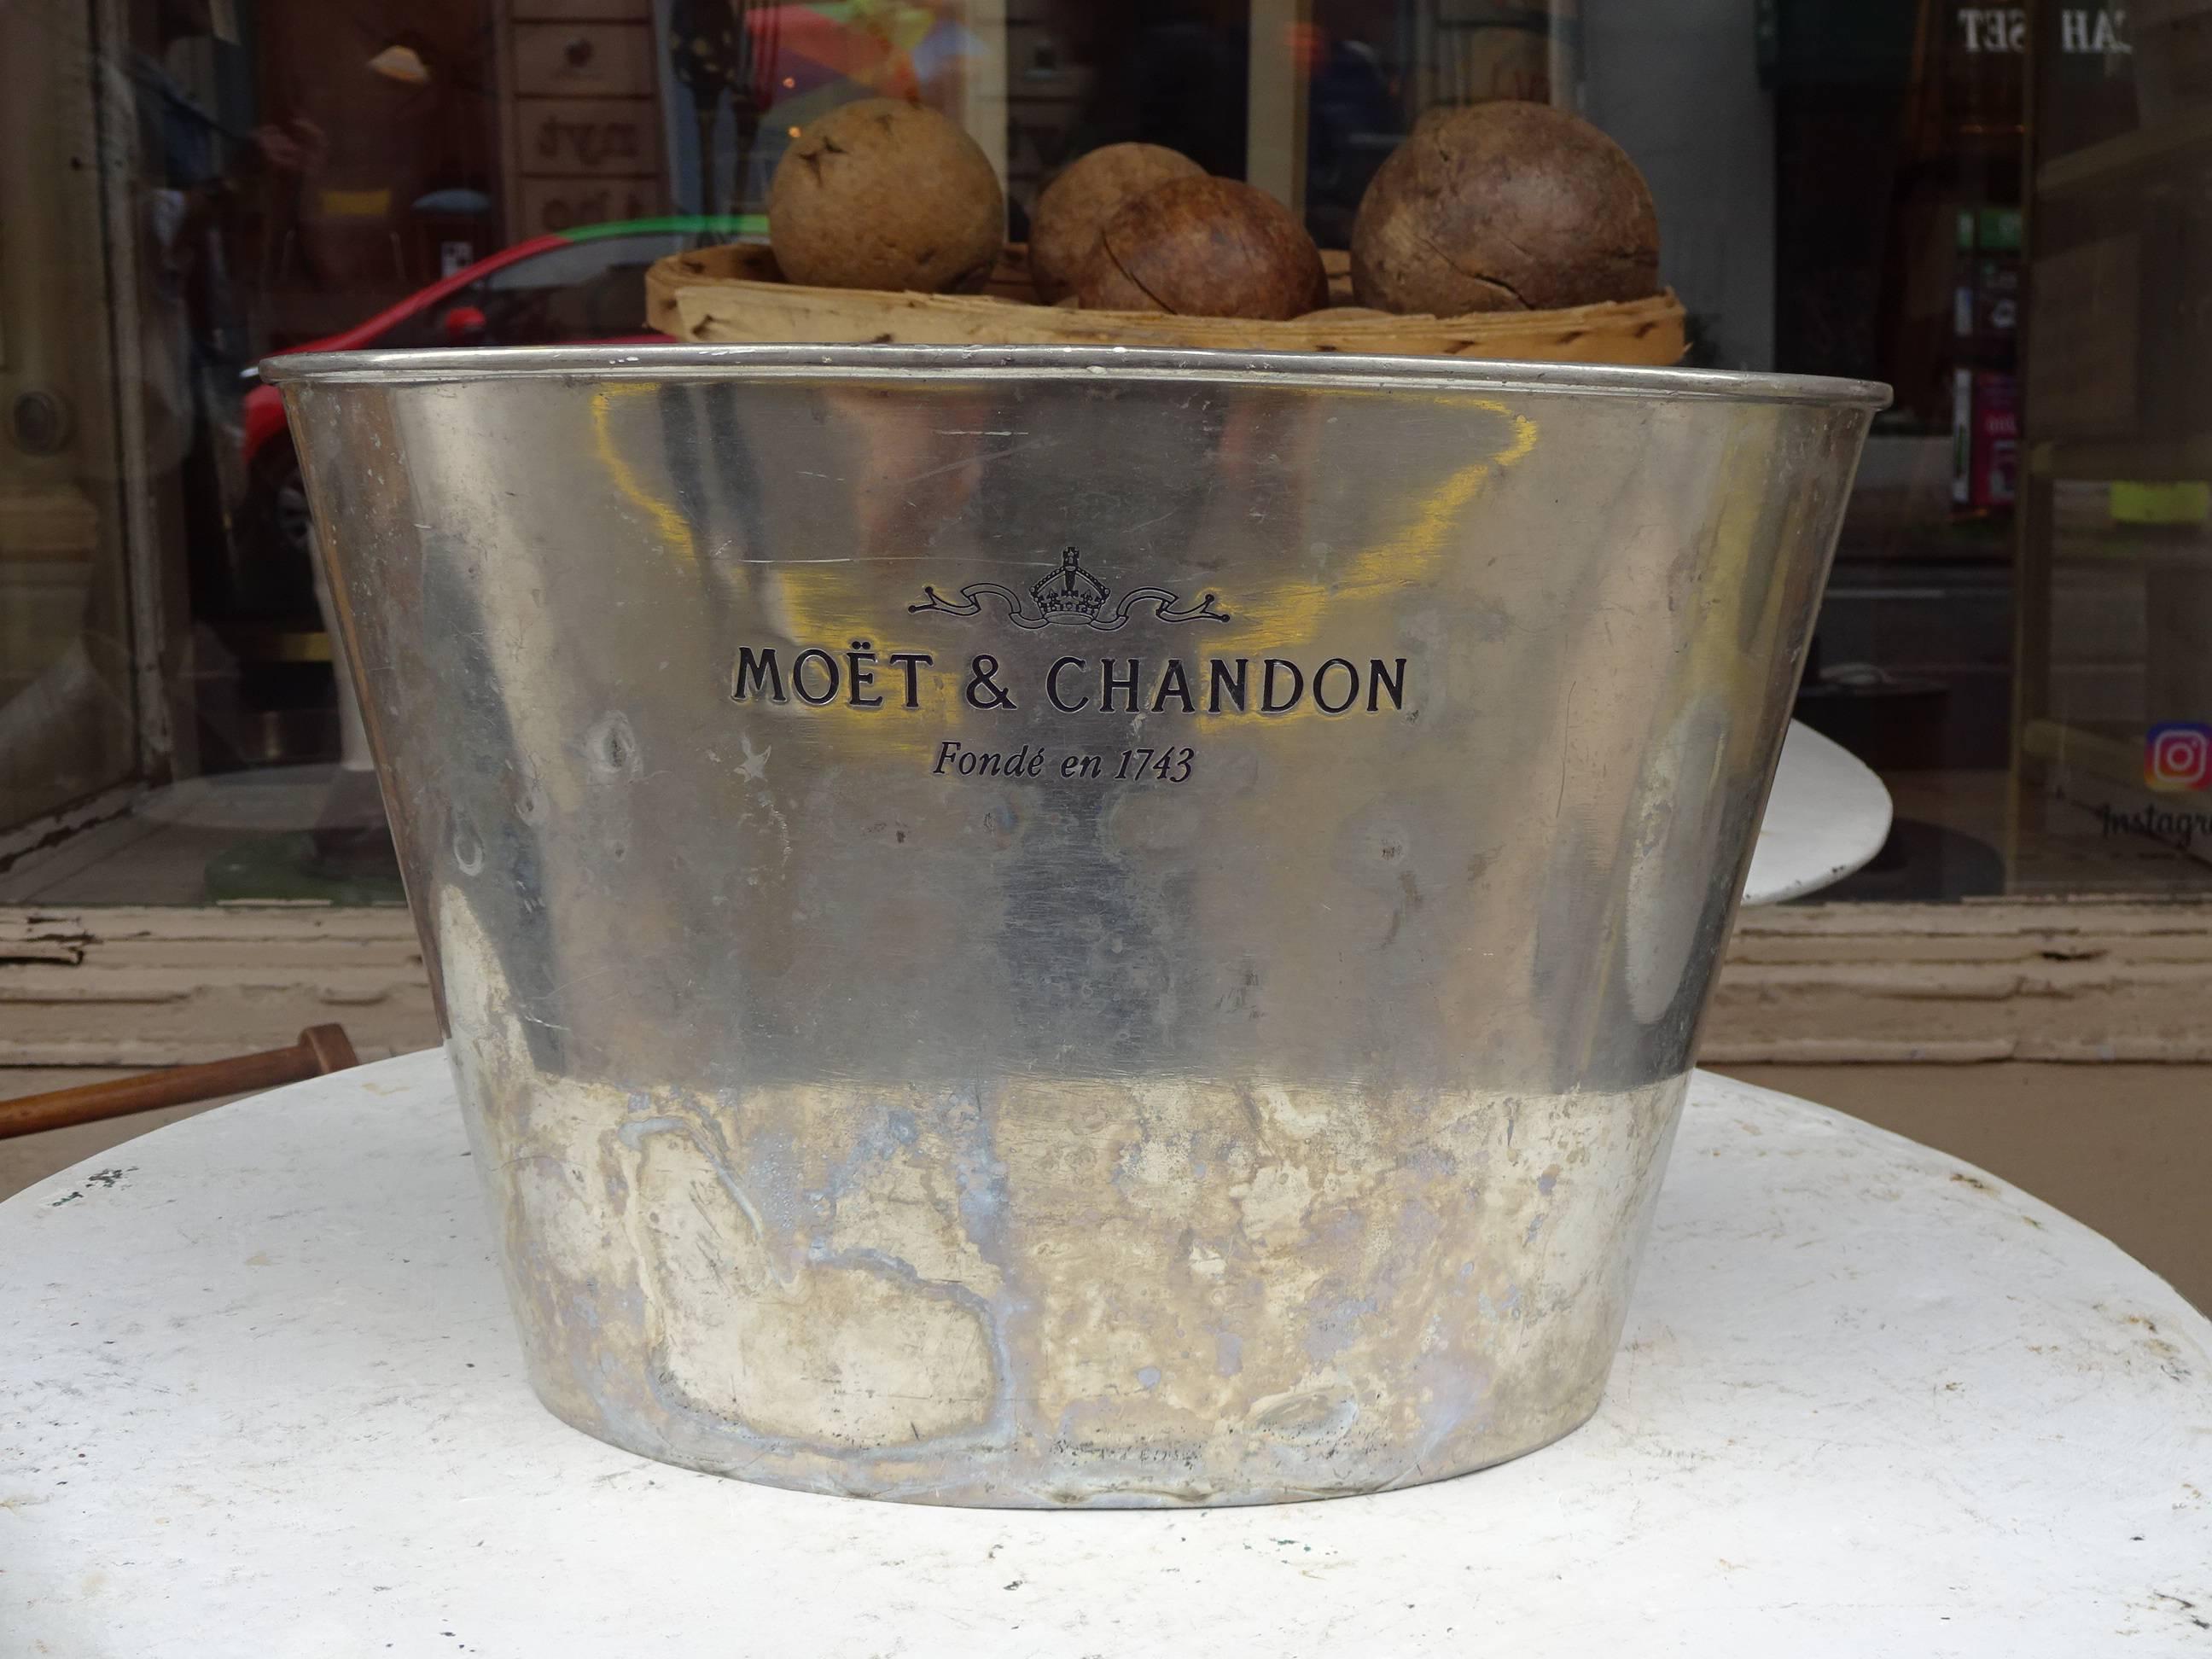 Handsome oval champagne tin cooler / ice bucket from the prominent champagne house Moët & Chandon. The bucket can hold two bottles.

 